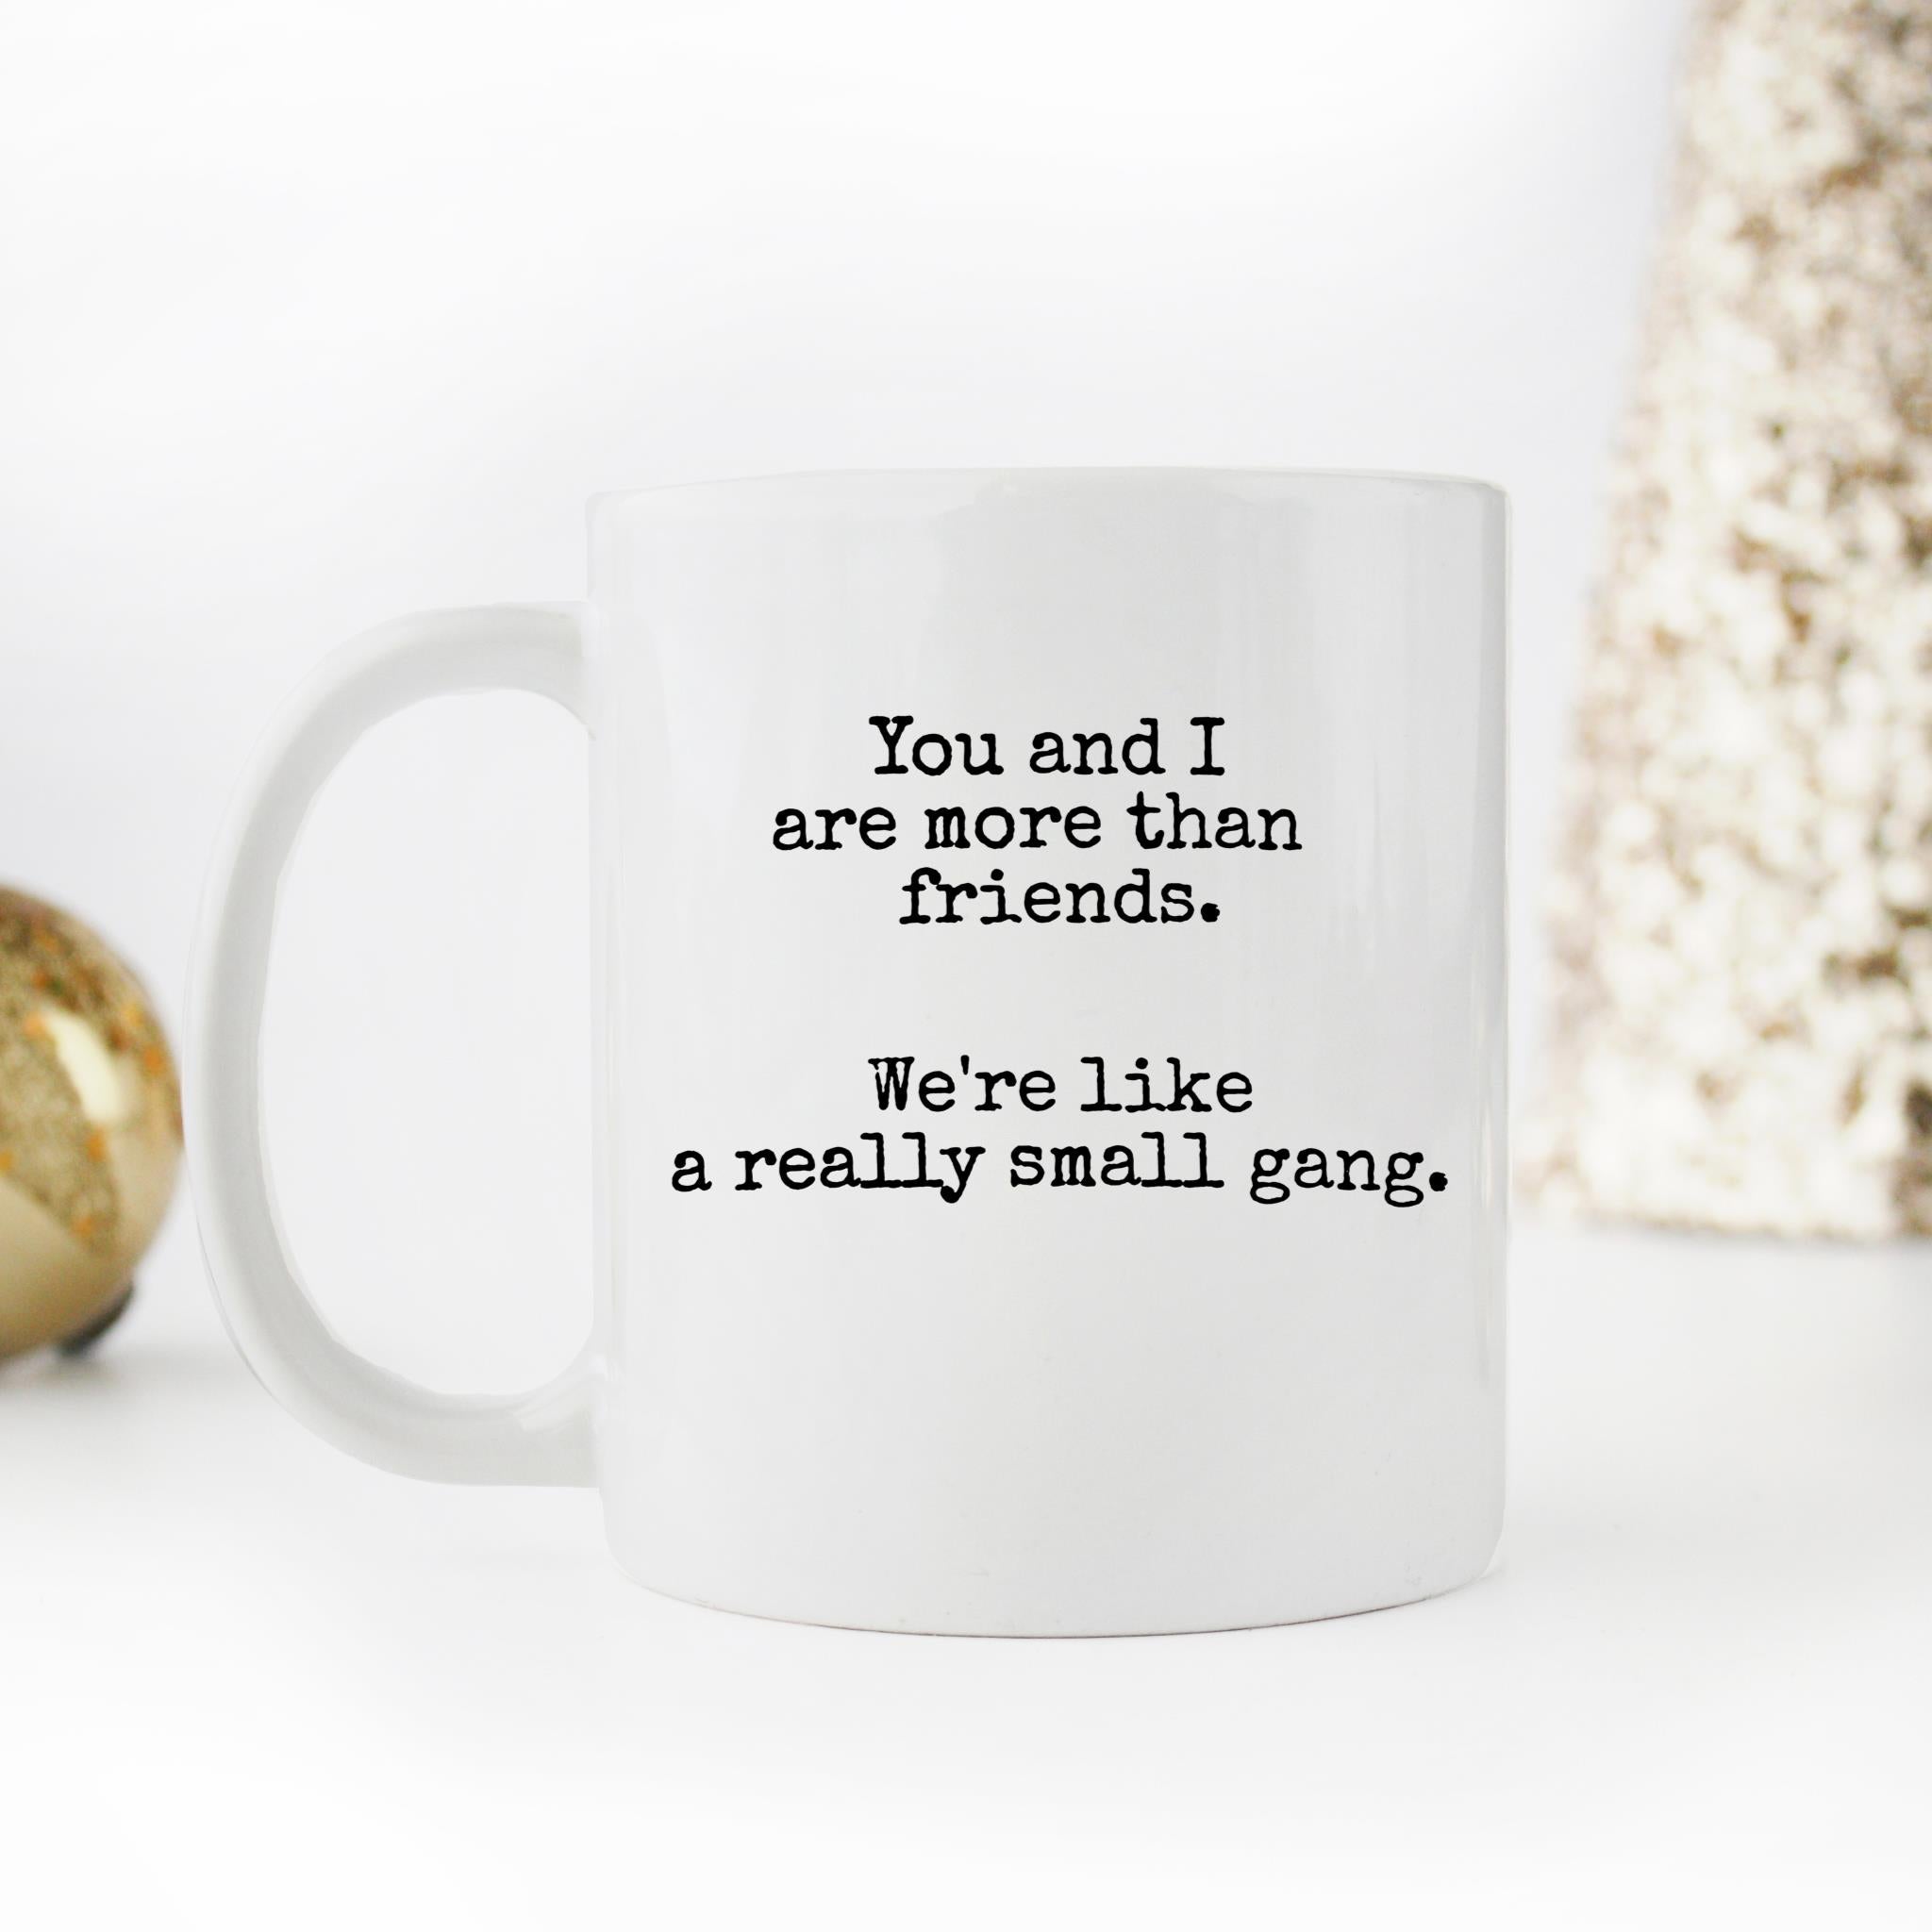 Skitongifts Funny Ceramic Novelty Coffee Mug You And I Are More Than Friends. We're Like A Really Small Gang Friendship Best Friend Birthday bpvMYmU